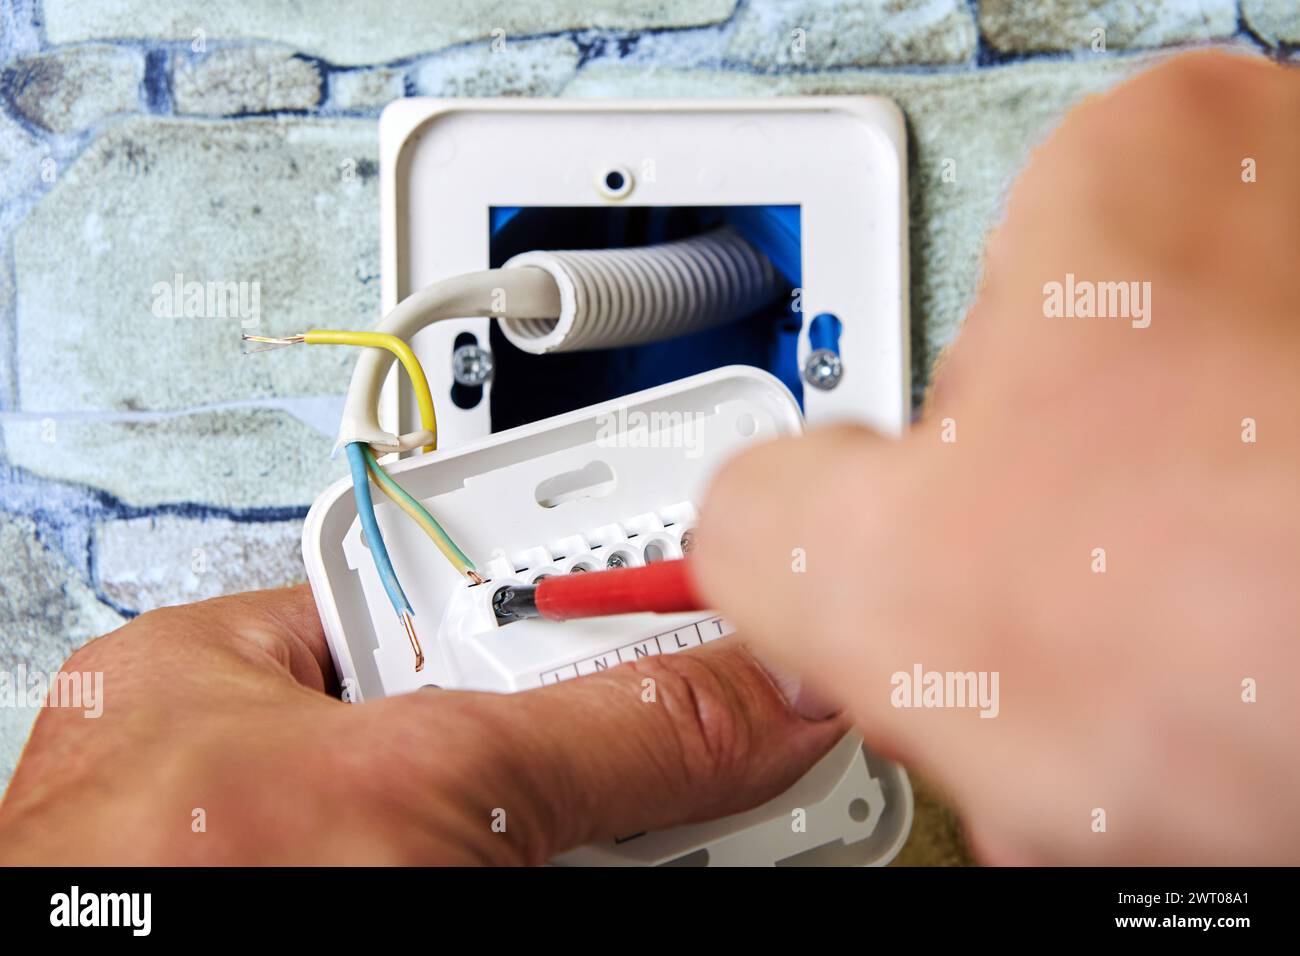 Wiring new electrical socket of thermostat in stone wall, Electrician Installing, connecting live neutral and ground wires, work involved in electrica Stock Photo